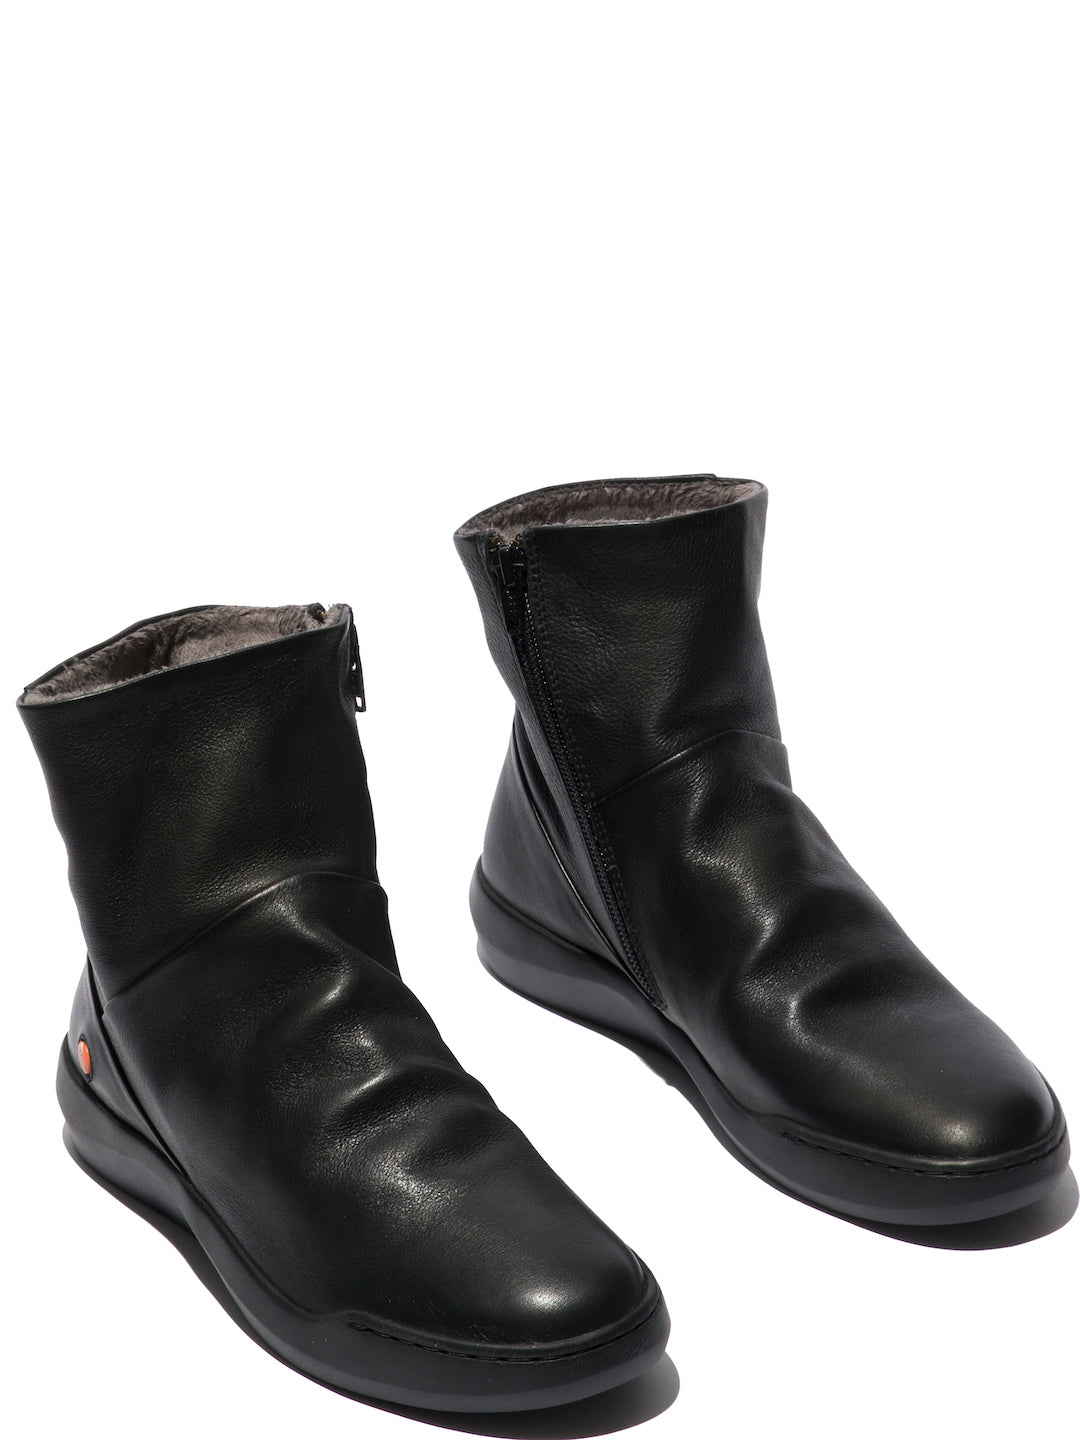 Softinos Bler 550 Ladies Black Leather Side Zip Ankle Boots